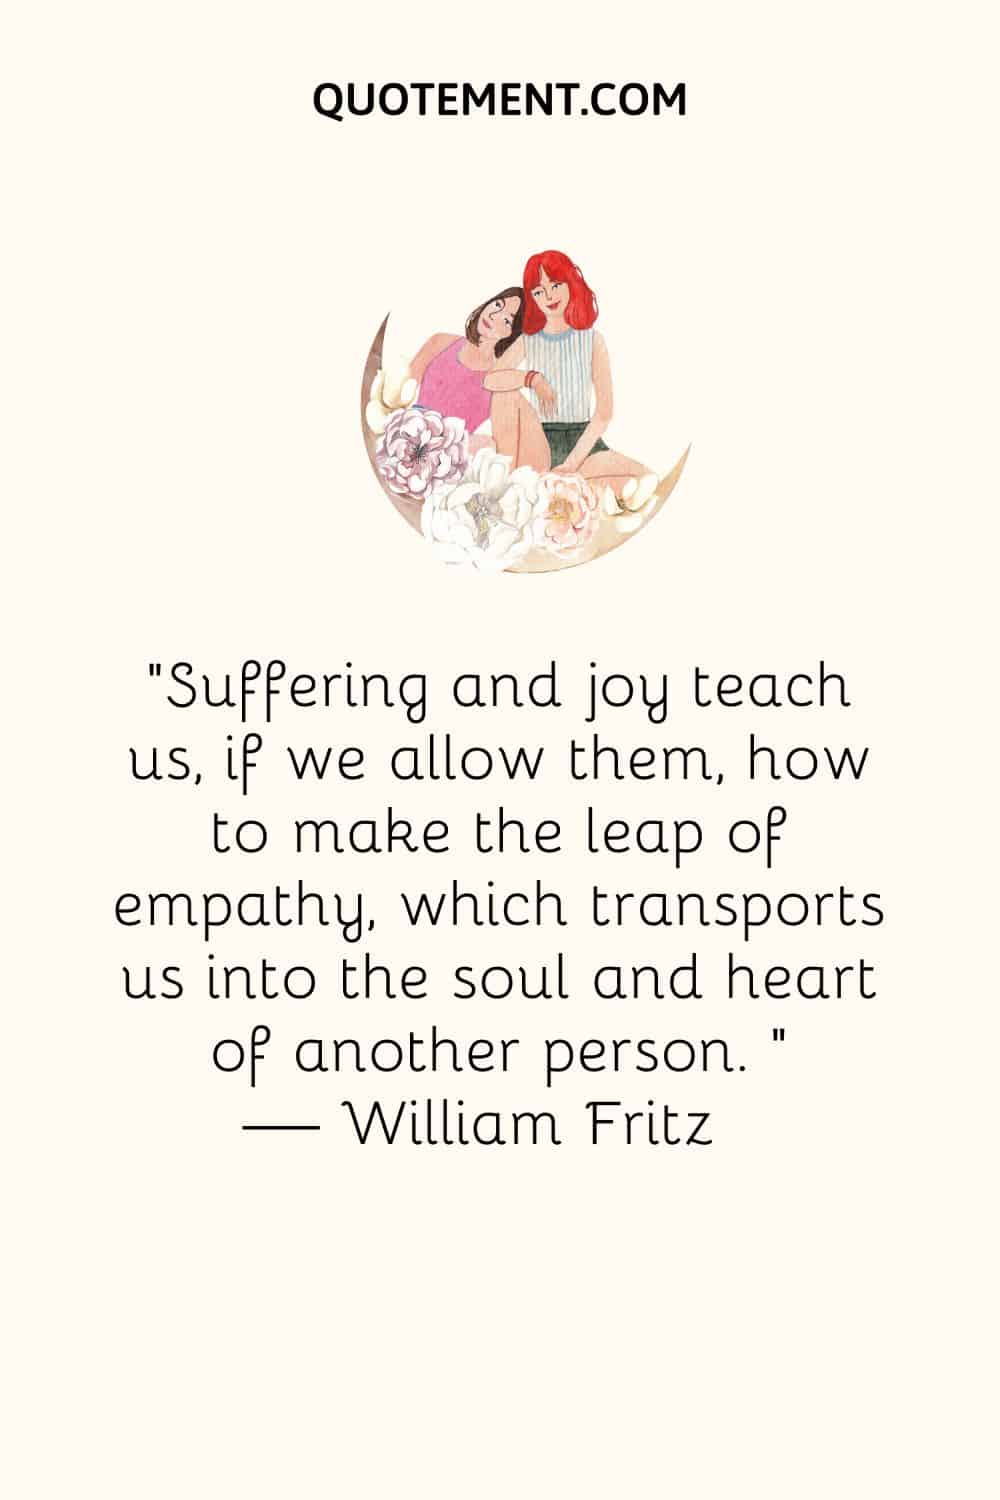 Suffering and joy teach us, if we allow them, how to make the leap of empathy, which transports us into the soul and heart of another person